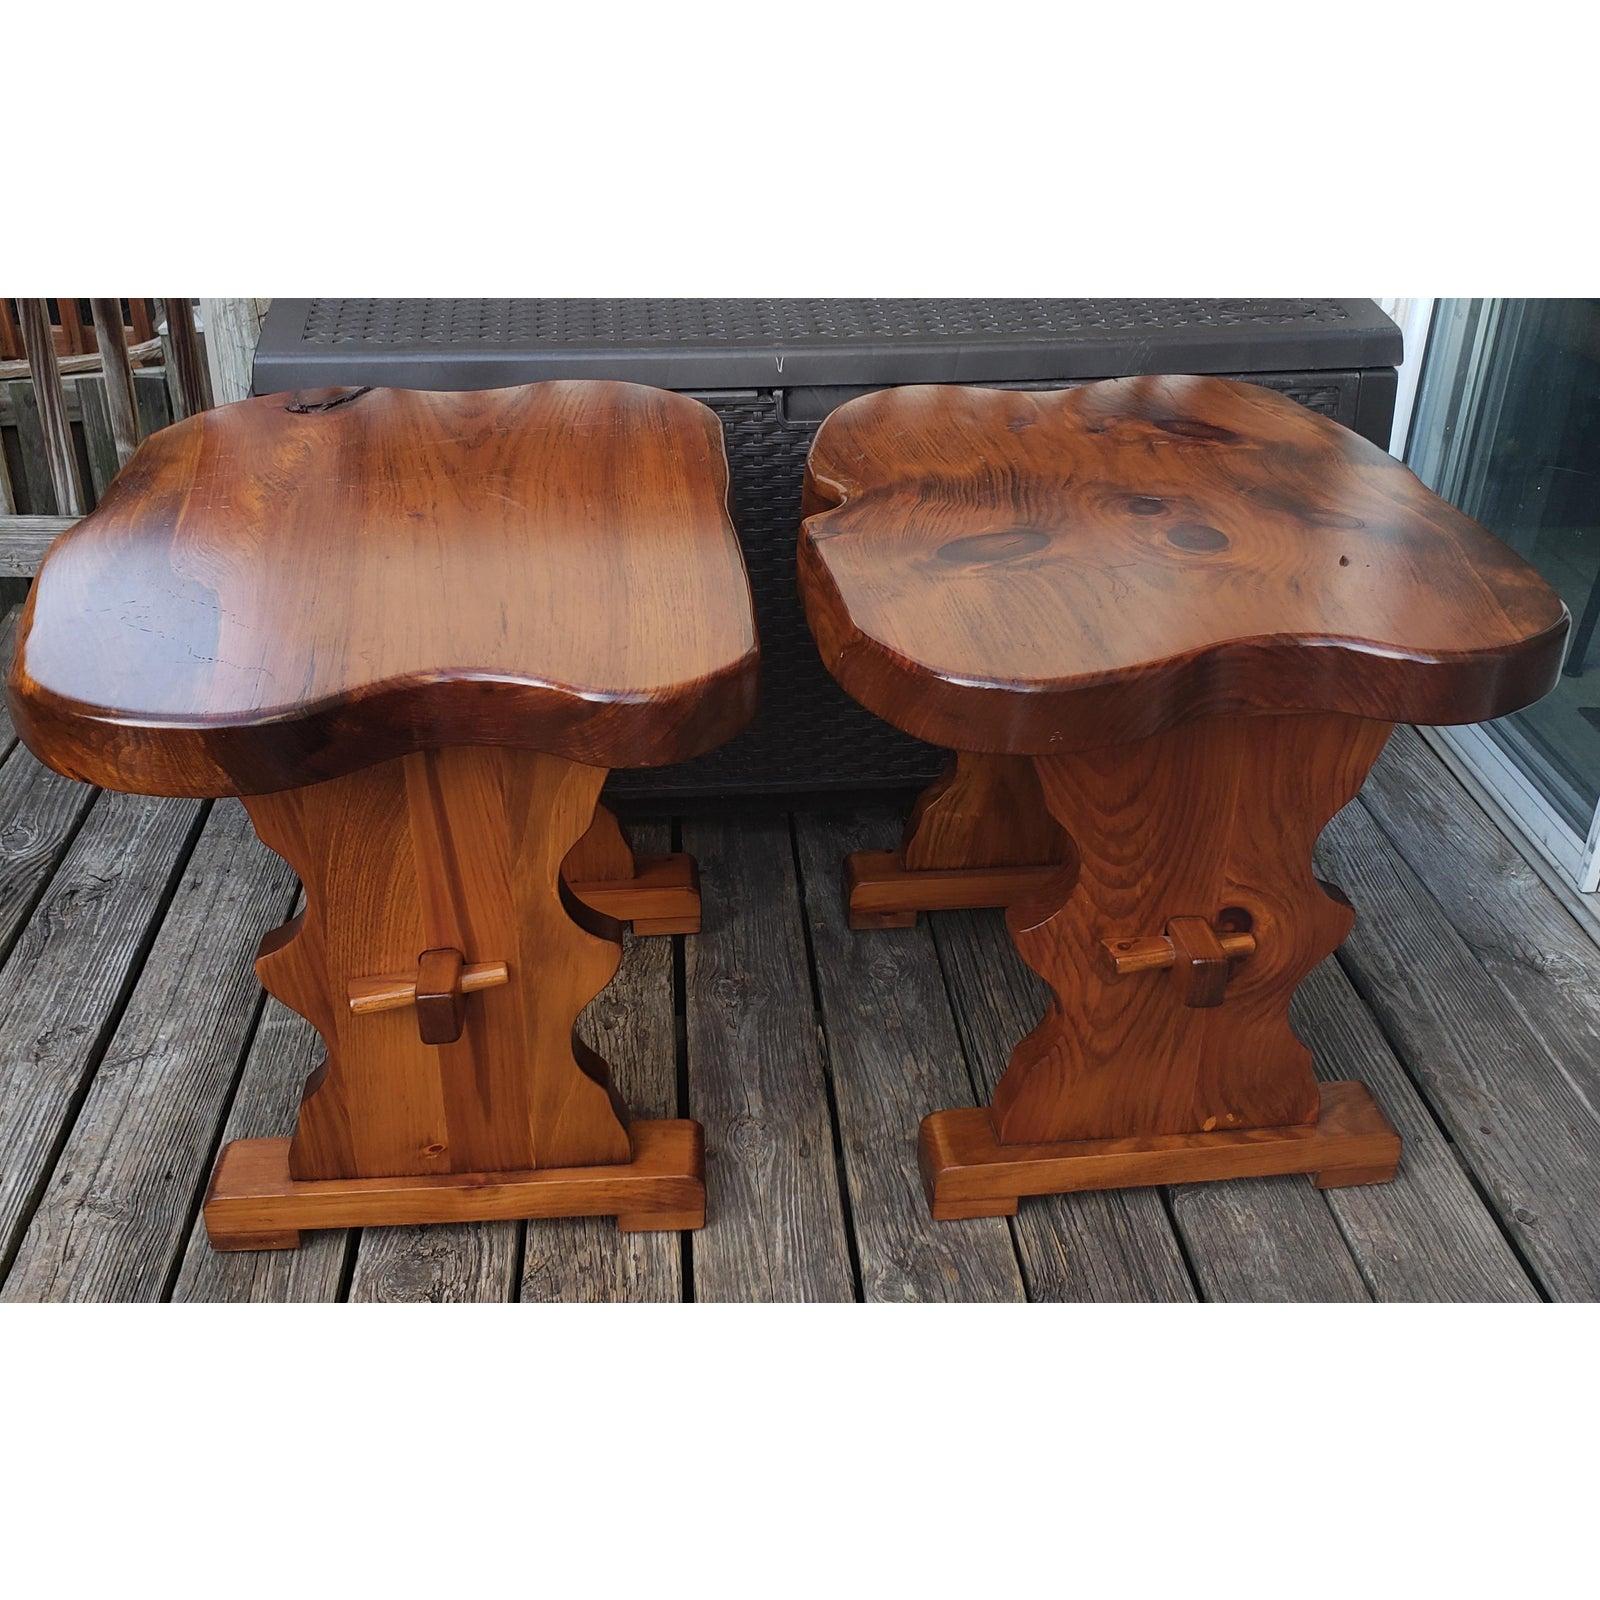 1980s Handcrafted Polished Walnut Pine Wood Slabs Trestle Side Tables, a Pair For Sale 3